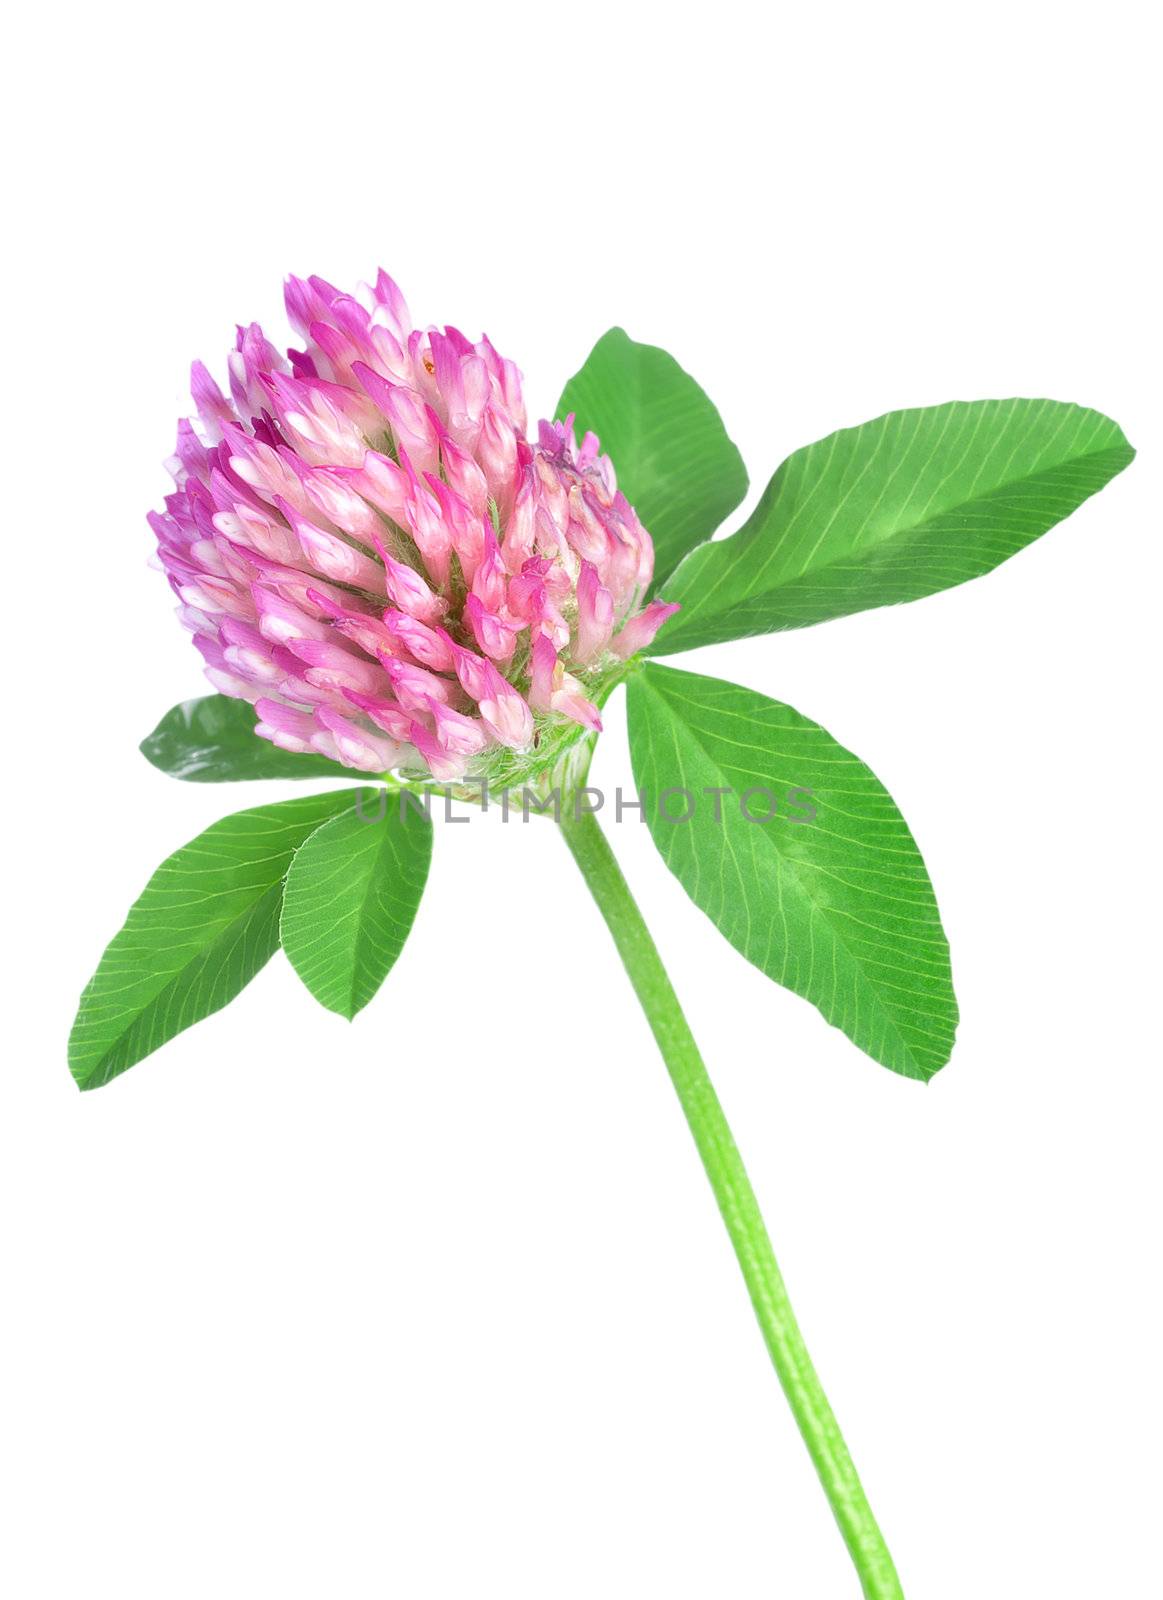 Red clover isolated on a white background